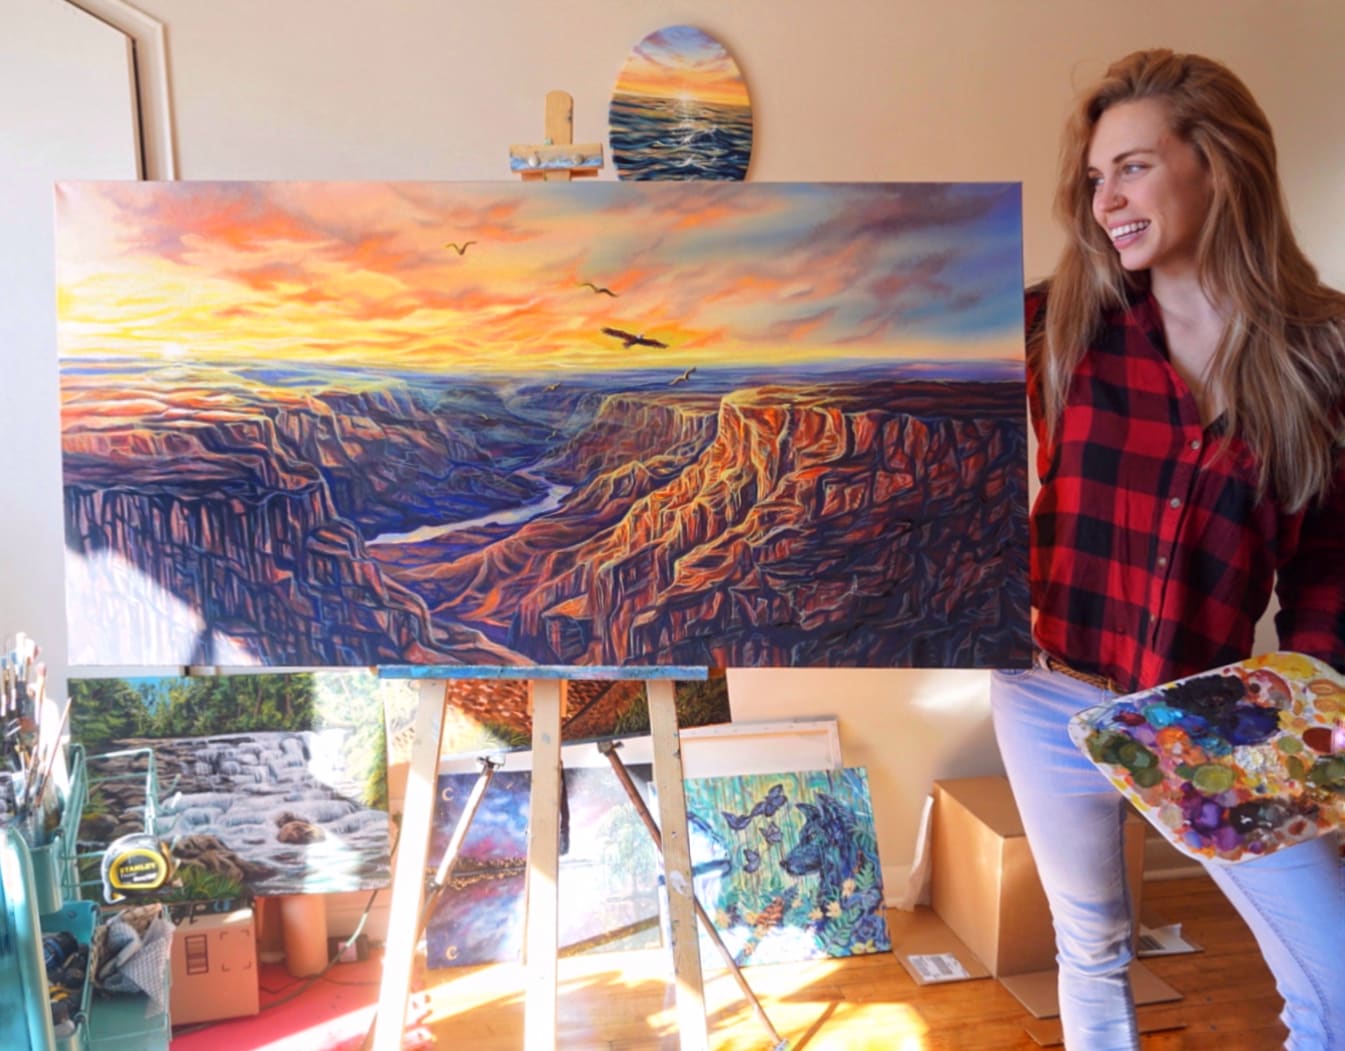 My large oil painting inspired by a stunning sunset I watched at The Grand Canyon!